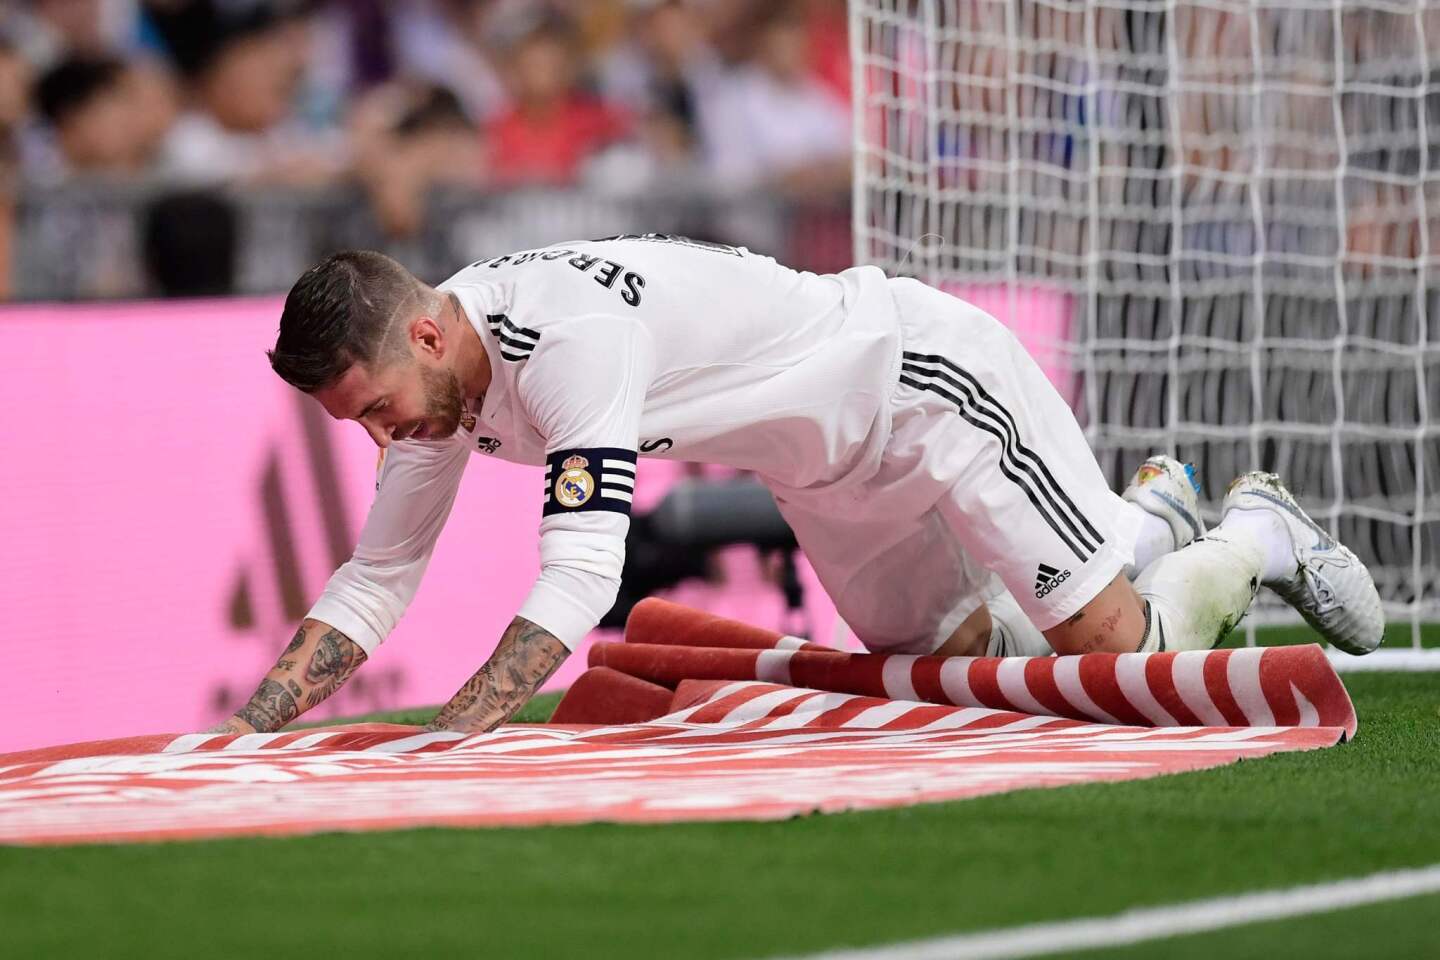 Real Madrid's Spanish defender Sergio Ramos reacts after missing a goal opportunity during the Spanish league football match between Real Madrid CF and RCD Espanyol at the Santiago Bernabeu stadium in Madrid on September 22, 2018. (Photo by JAVIER SORIANO / AFP)JAVIER SORIANO/AFP/Getty Images ** OUTS - ELSENT, FPG, CM - OUTS * NM, PH, VA if sourced by CT, LA or MoD **